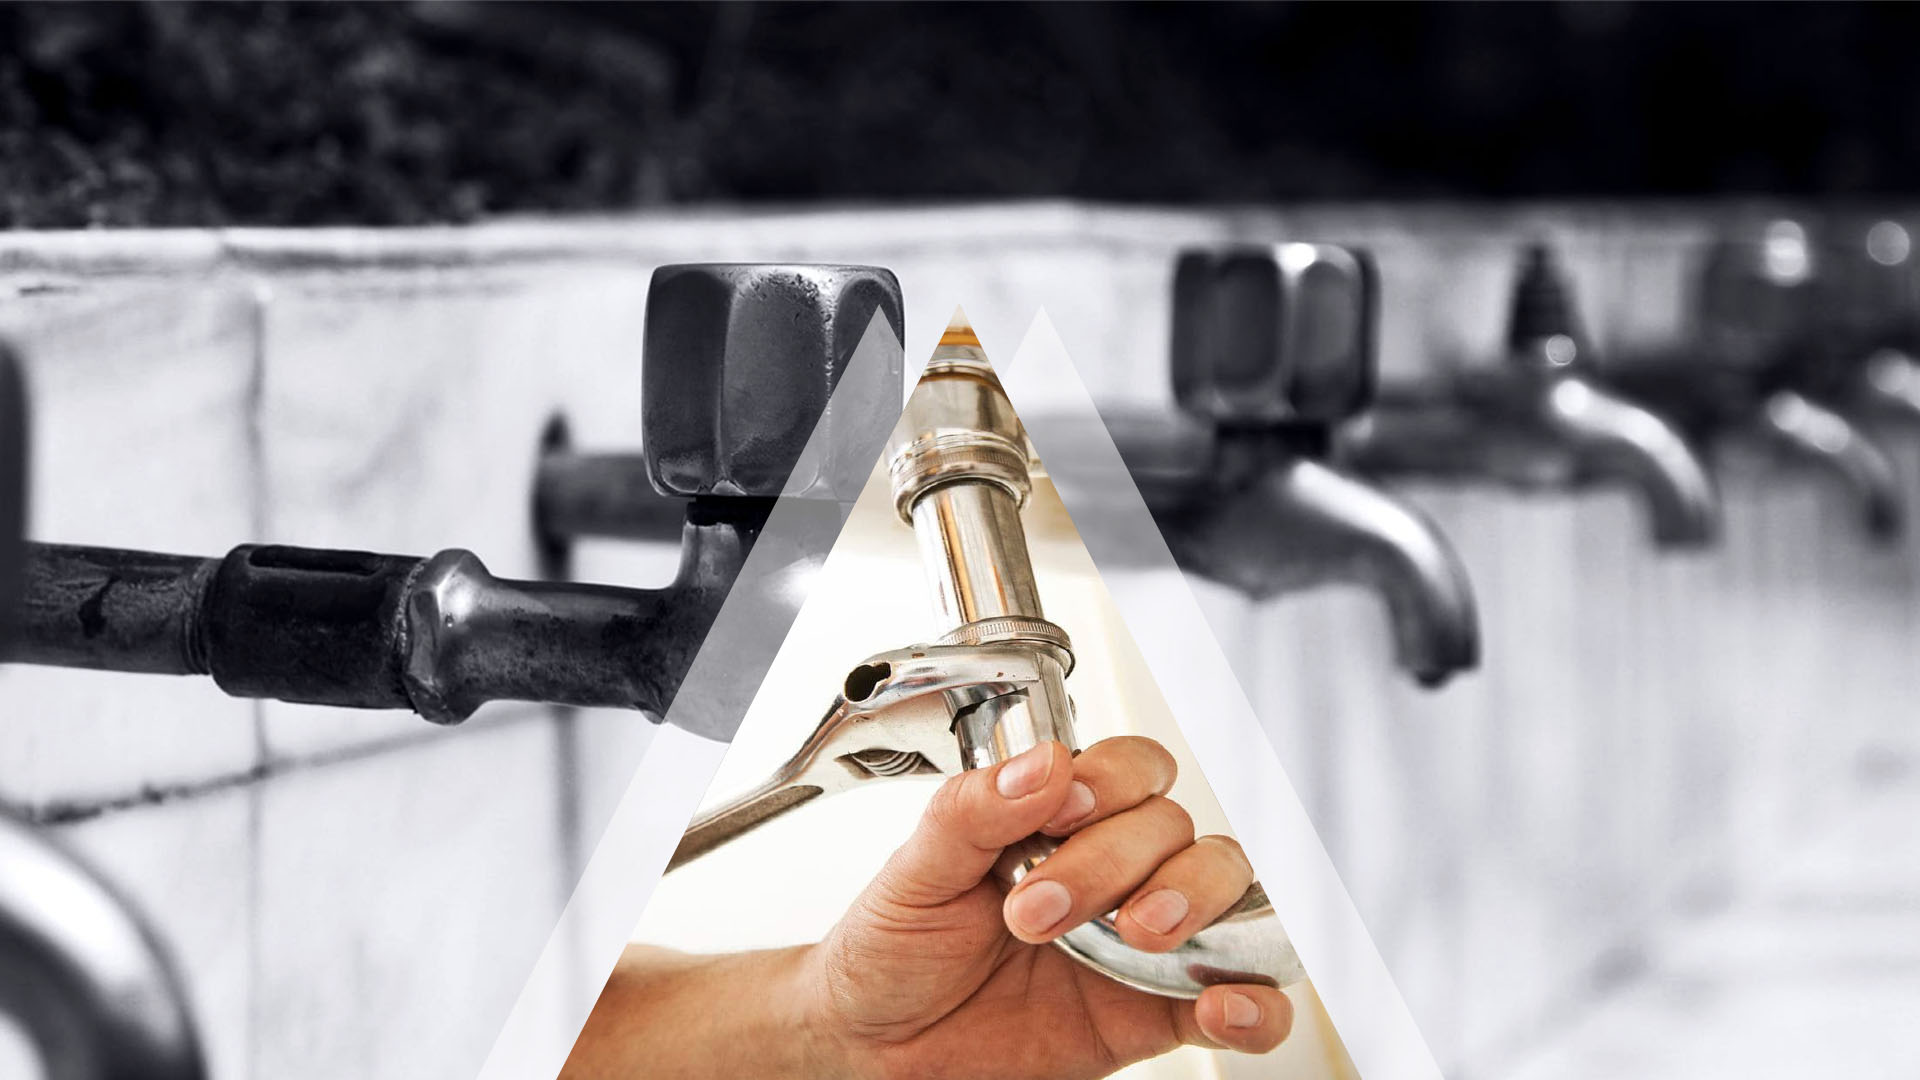 Guilroy Plumbing - Full service pluambing just a call away